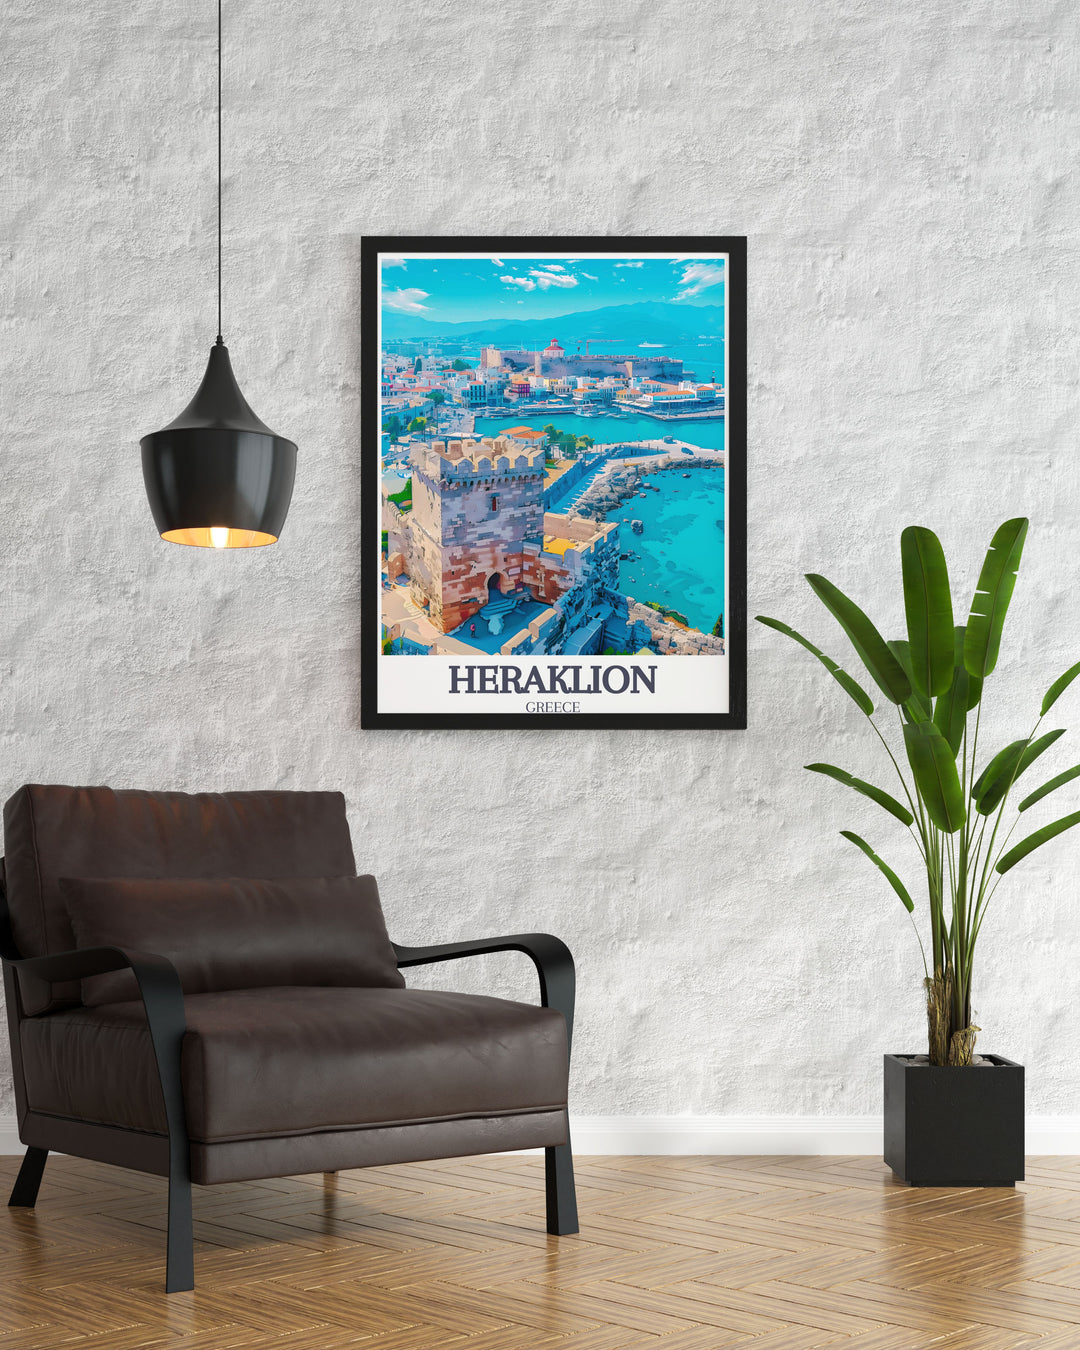 Vintage poster of Heraklion, featuring the iconic Venetian Fortress of Koules, Crete, Greece. This piece captures the timeless beauty and historical significance of the fortress, evoking the charm of Greek cultural heritage and military architecture.